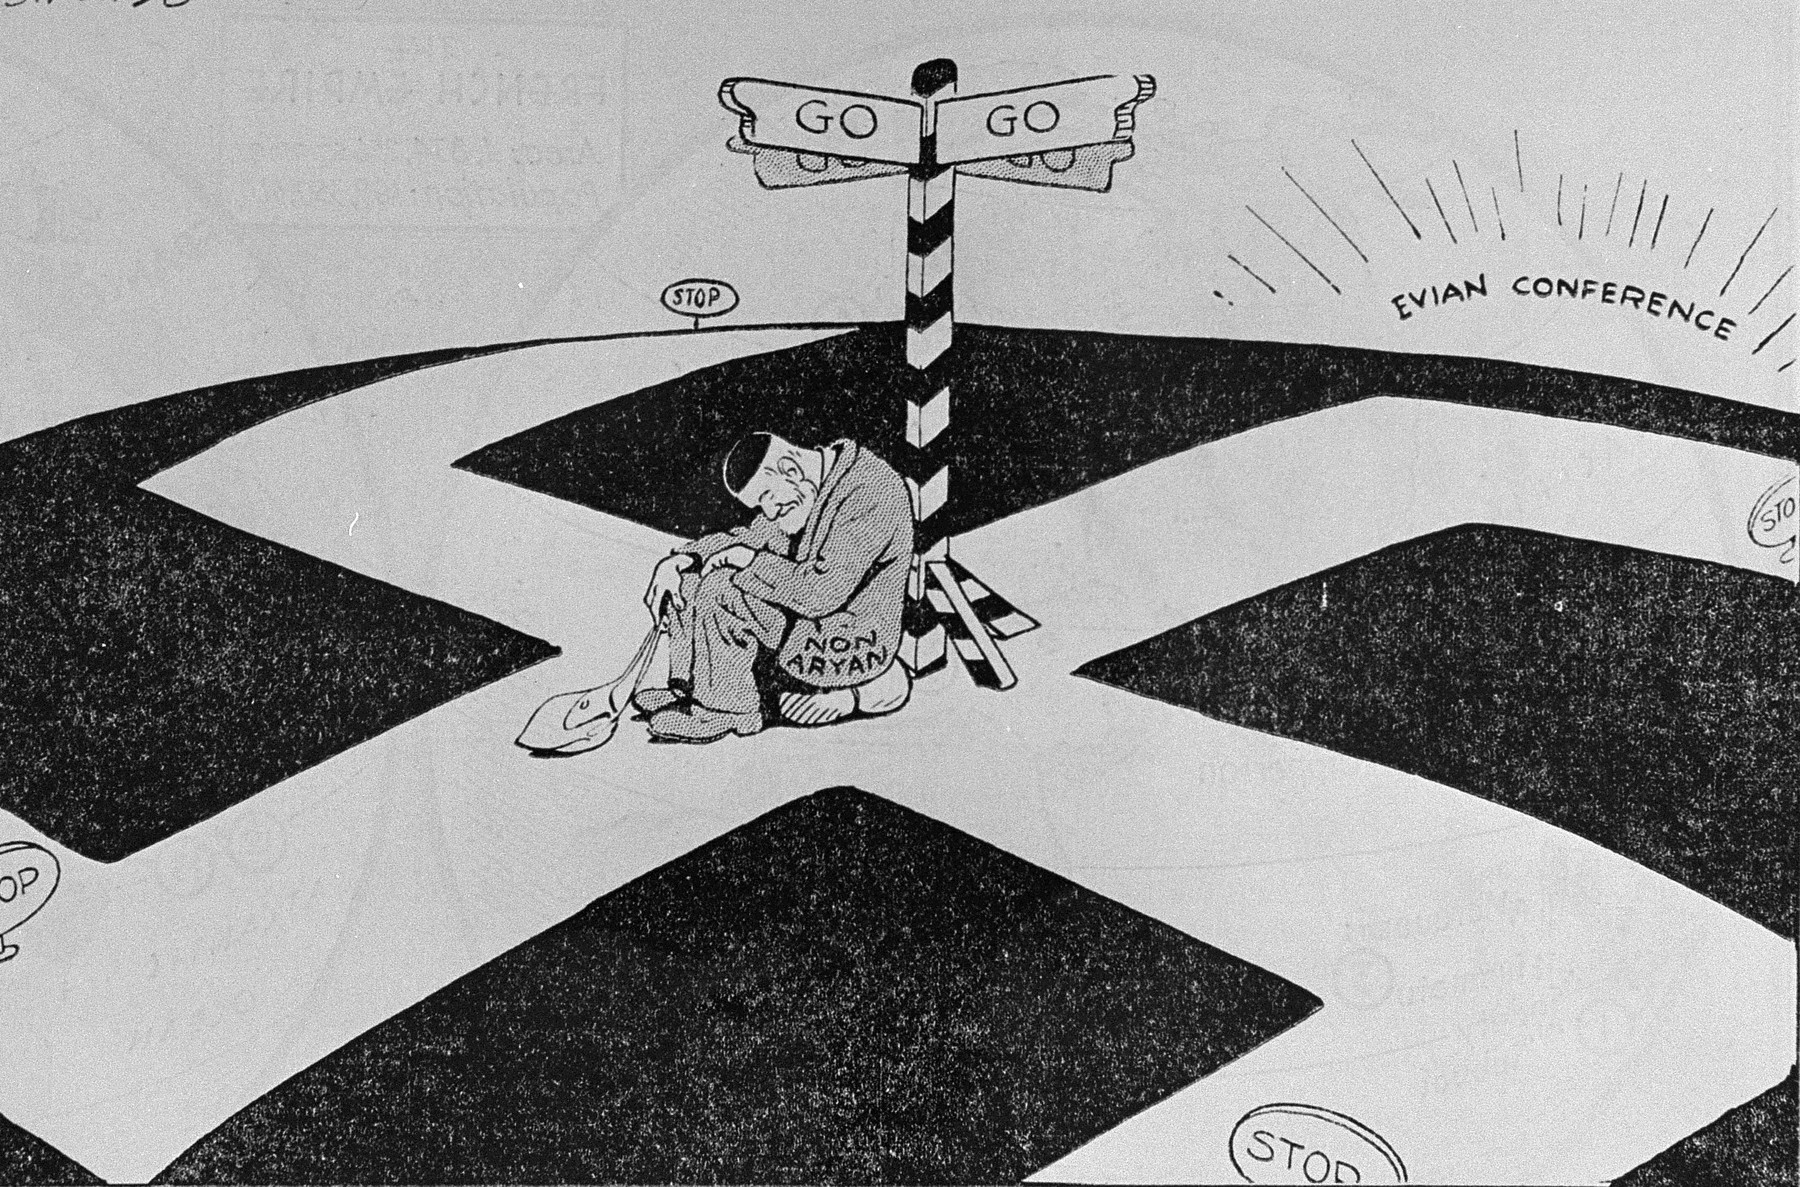 Political cartoon by Sidney 'George' Strube, entitled, "Will the Evian Conference guide him to freedom?" that was published in the Sunday, July 3, 1938 edition of The New York Times.